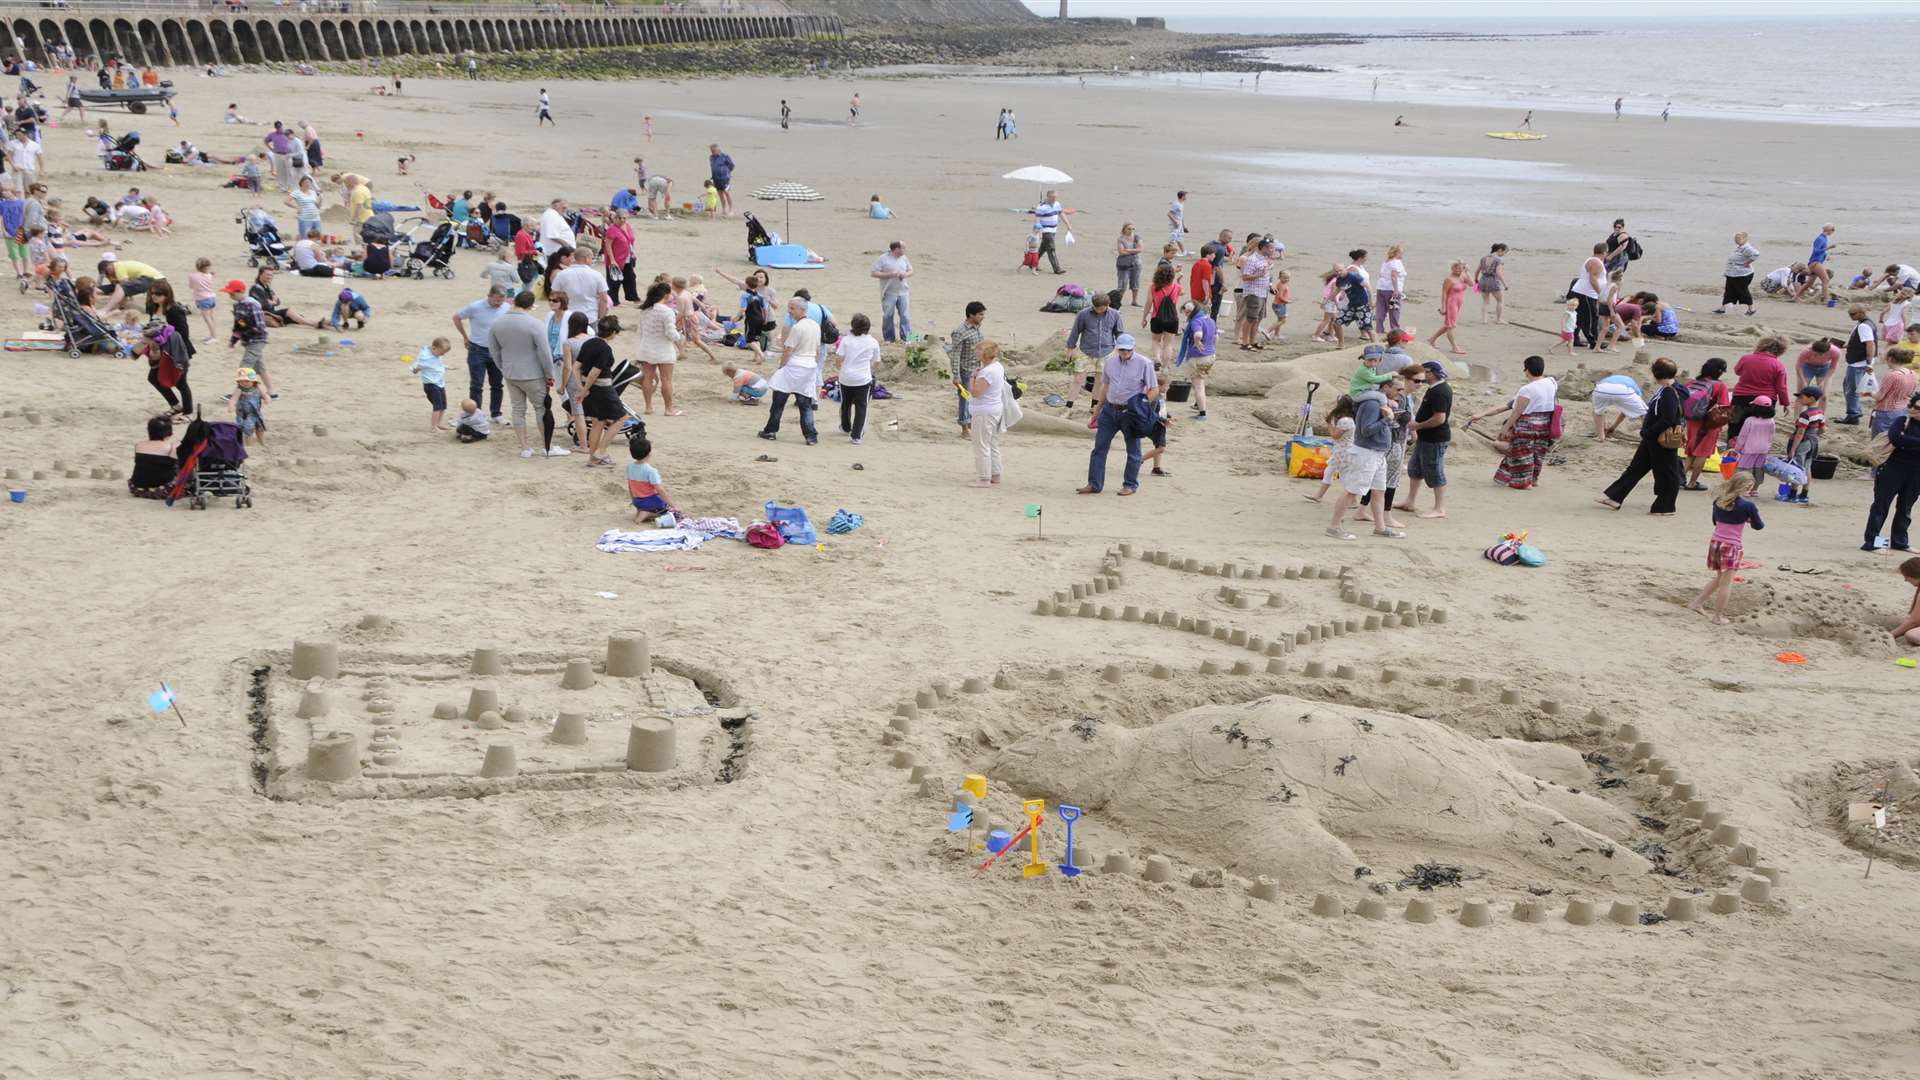 The Sandcastle Competition will be held on Sunday